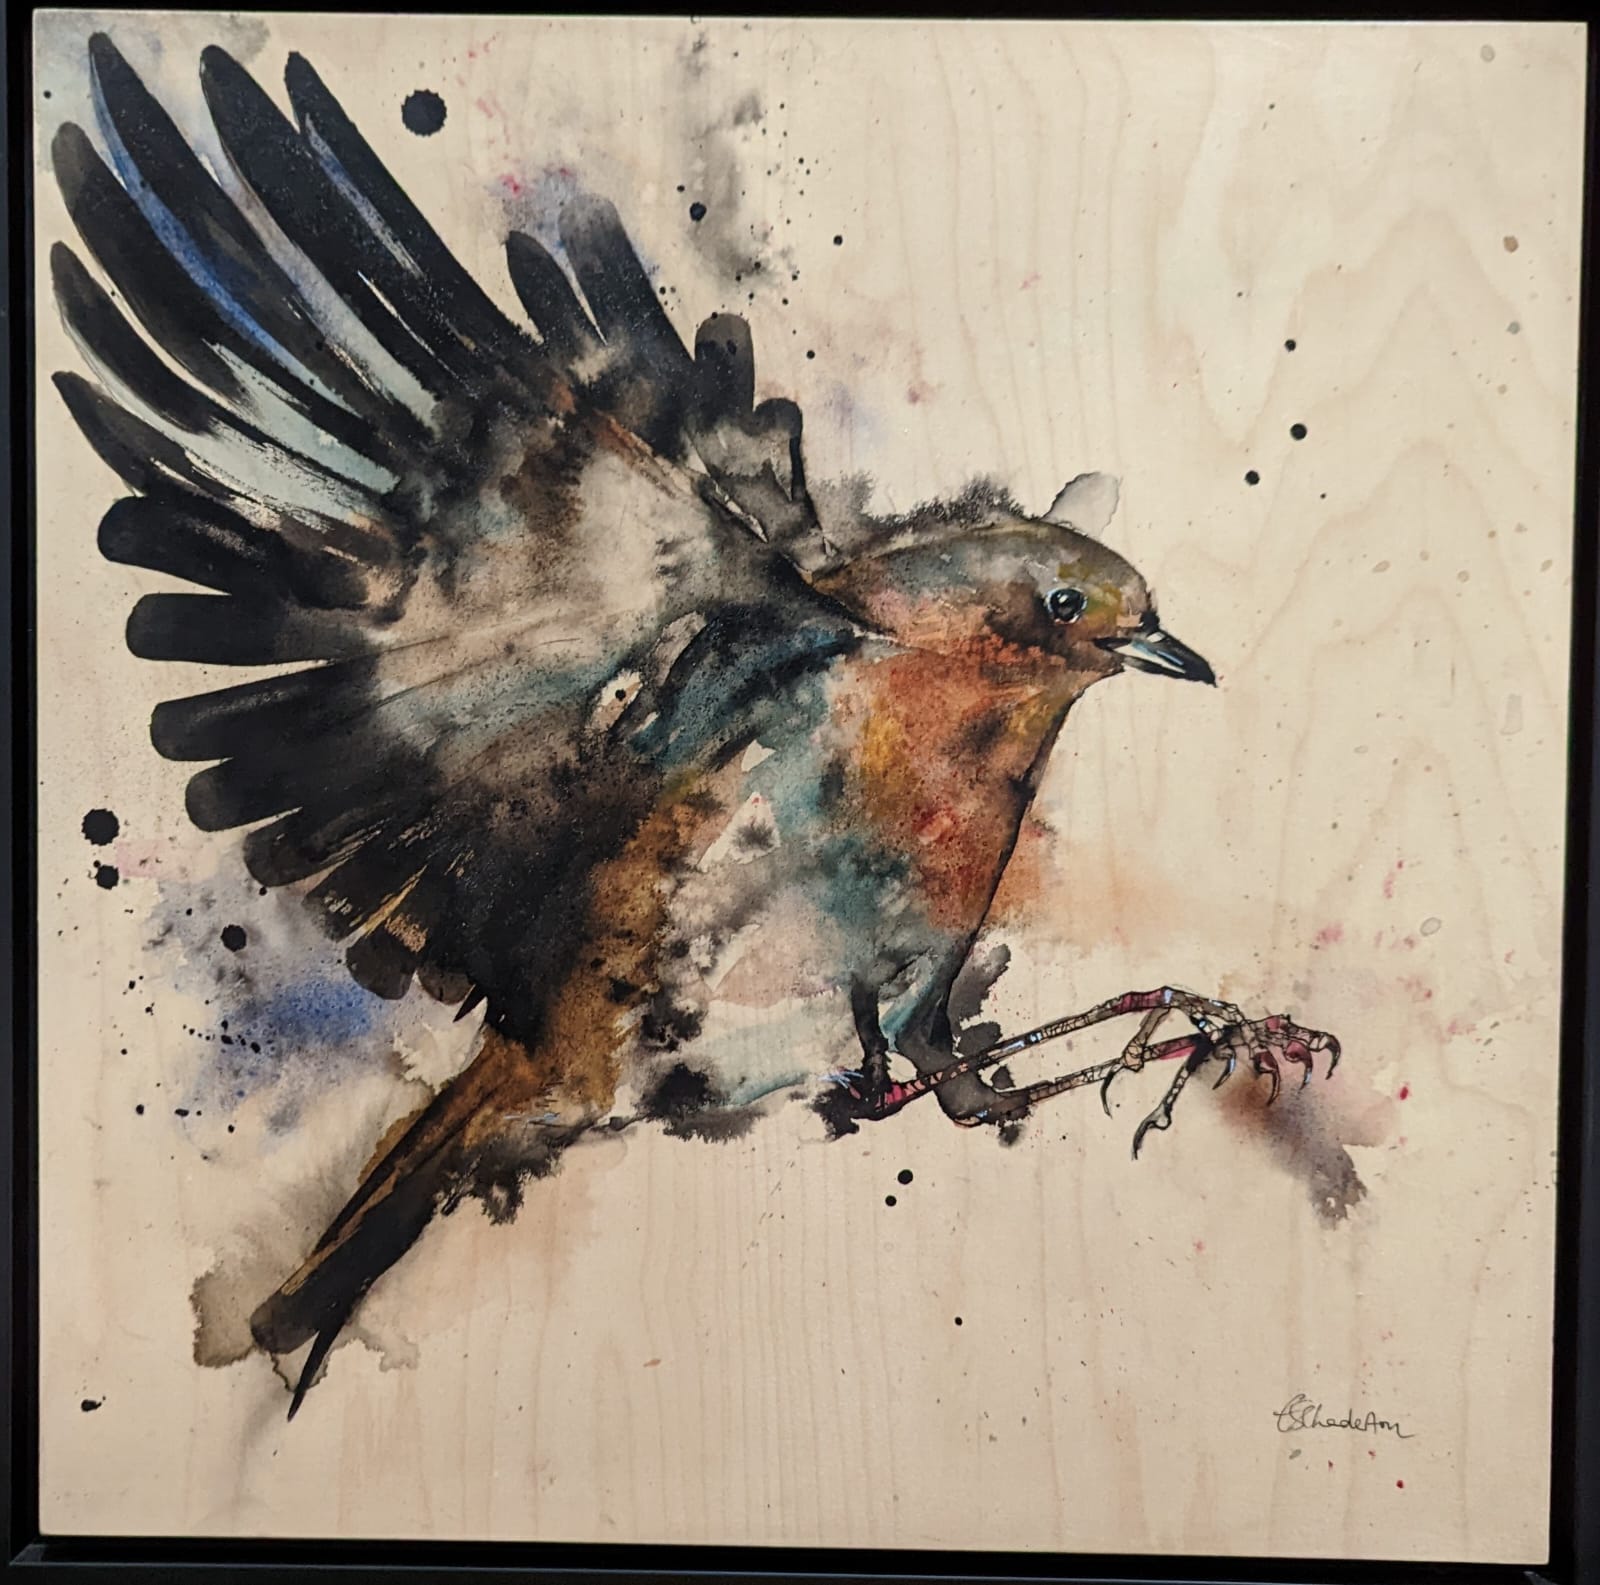 When Robin's appear, Loved ones are Near - Liz Chaderton - 54 x 54 cm including frame